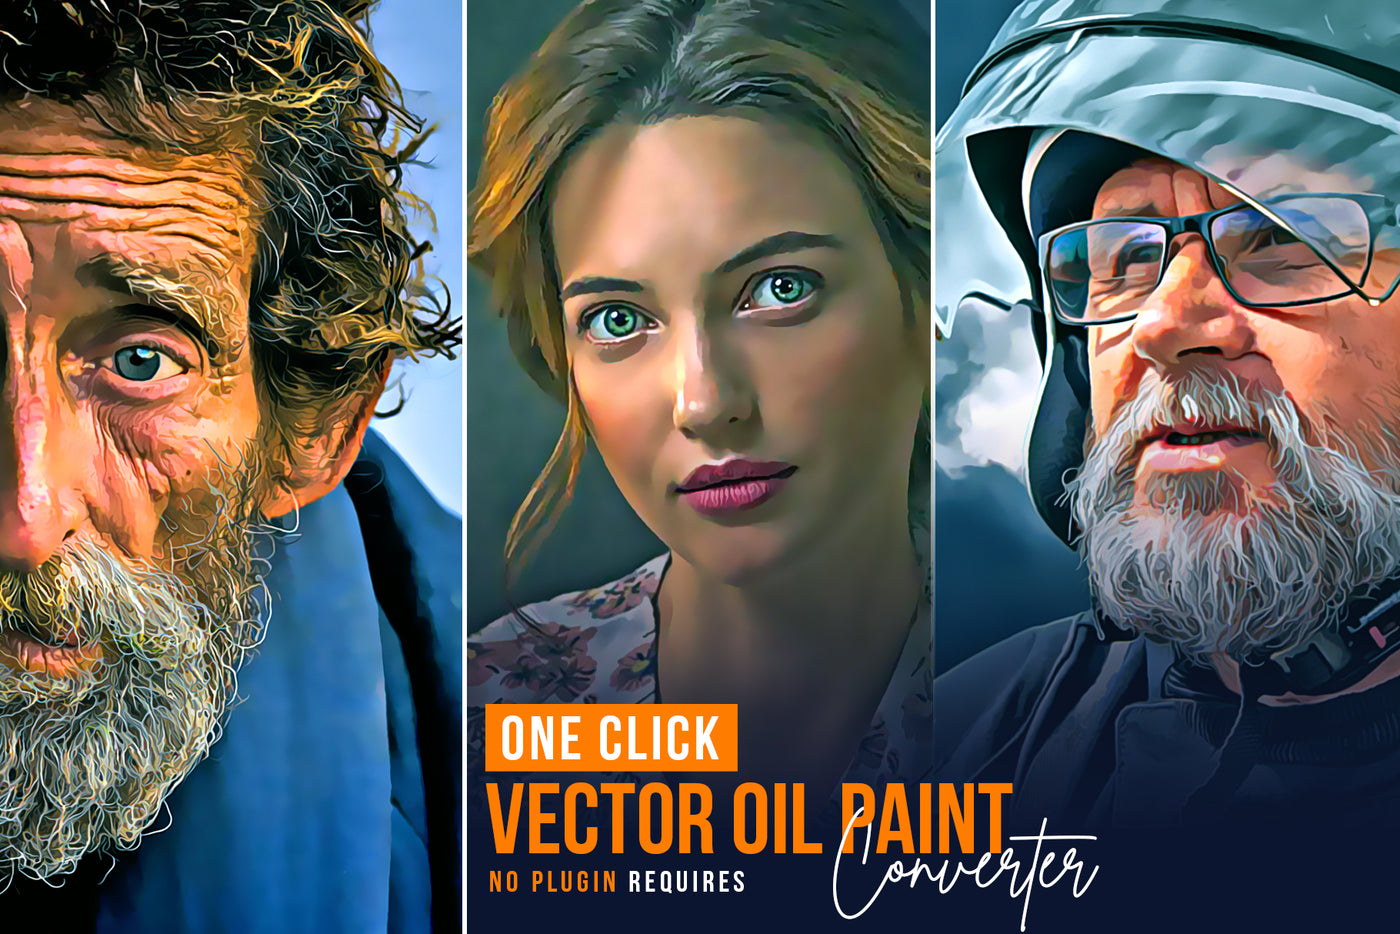 10-In-1 Authentic Painting Photoshop Actions Bundle